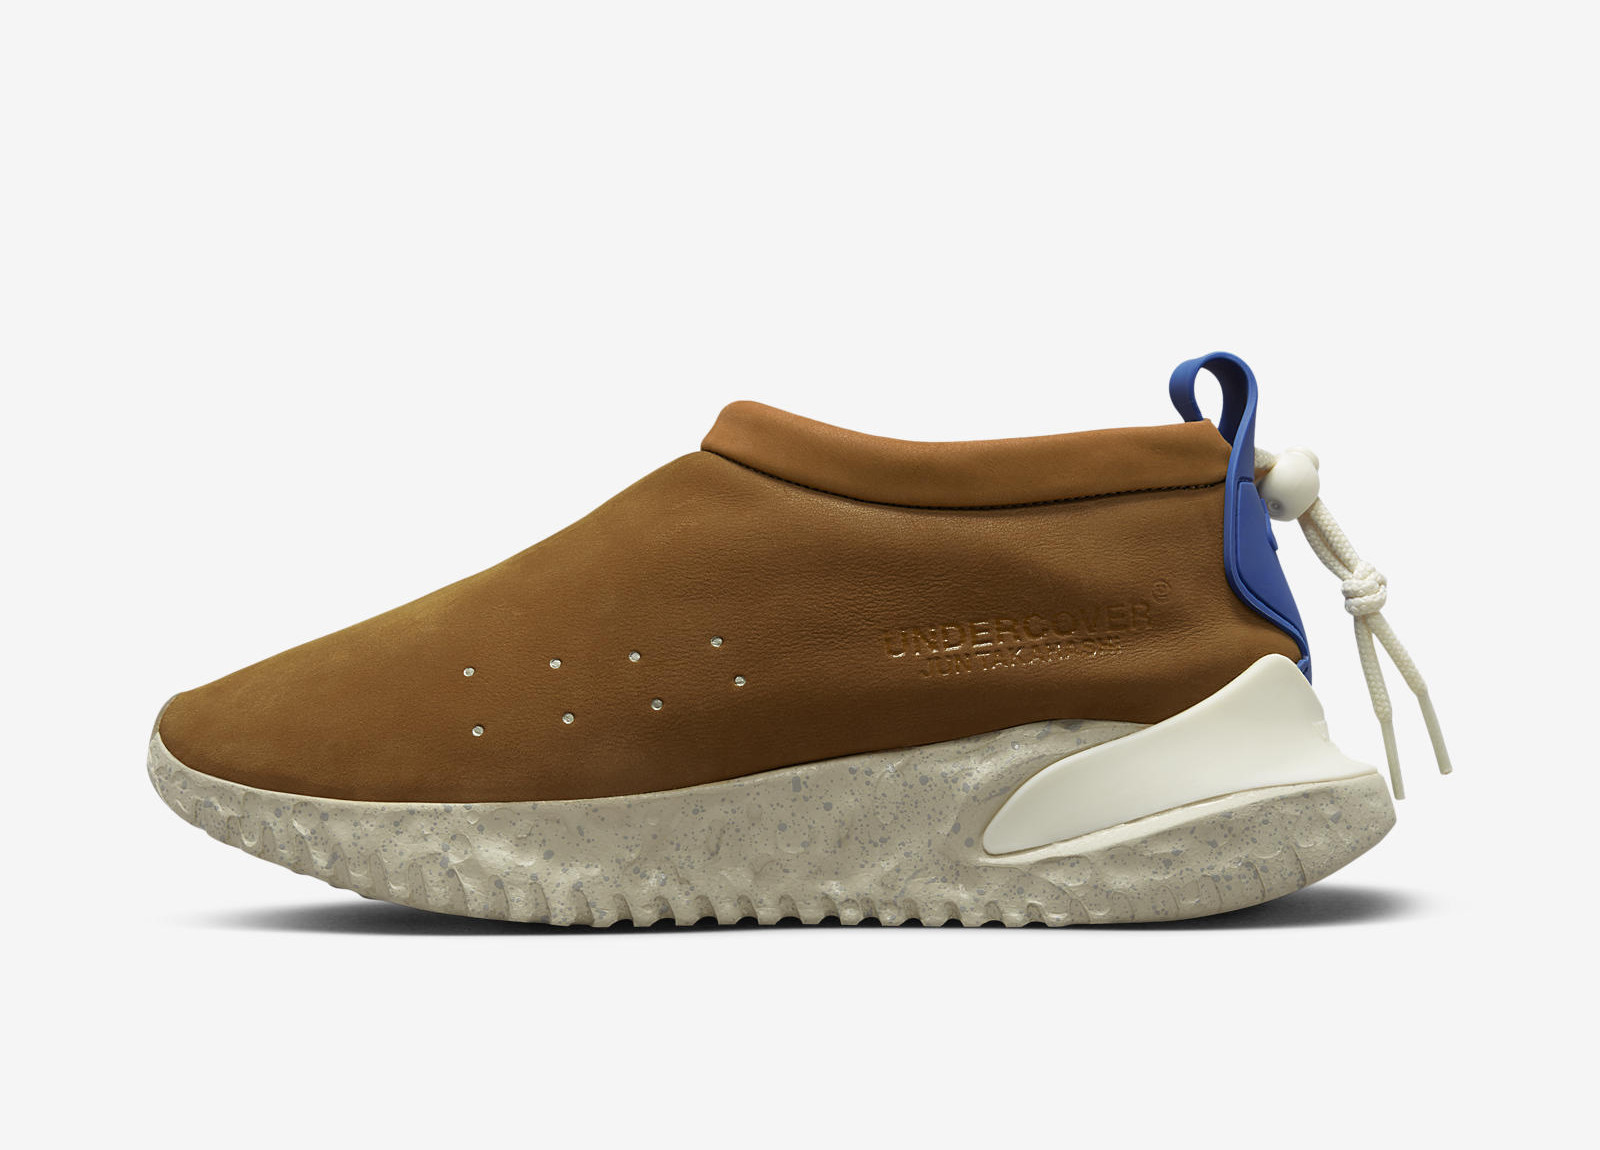 UNDERCOVER x Nike
Moc Flow
« Ale Brown »